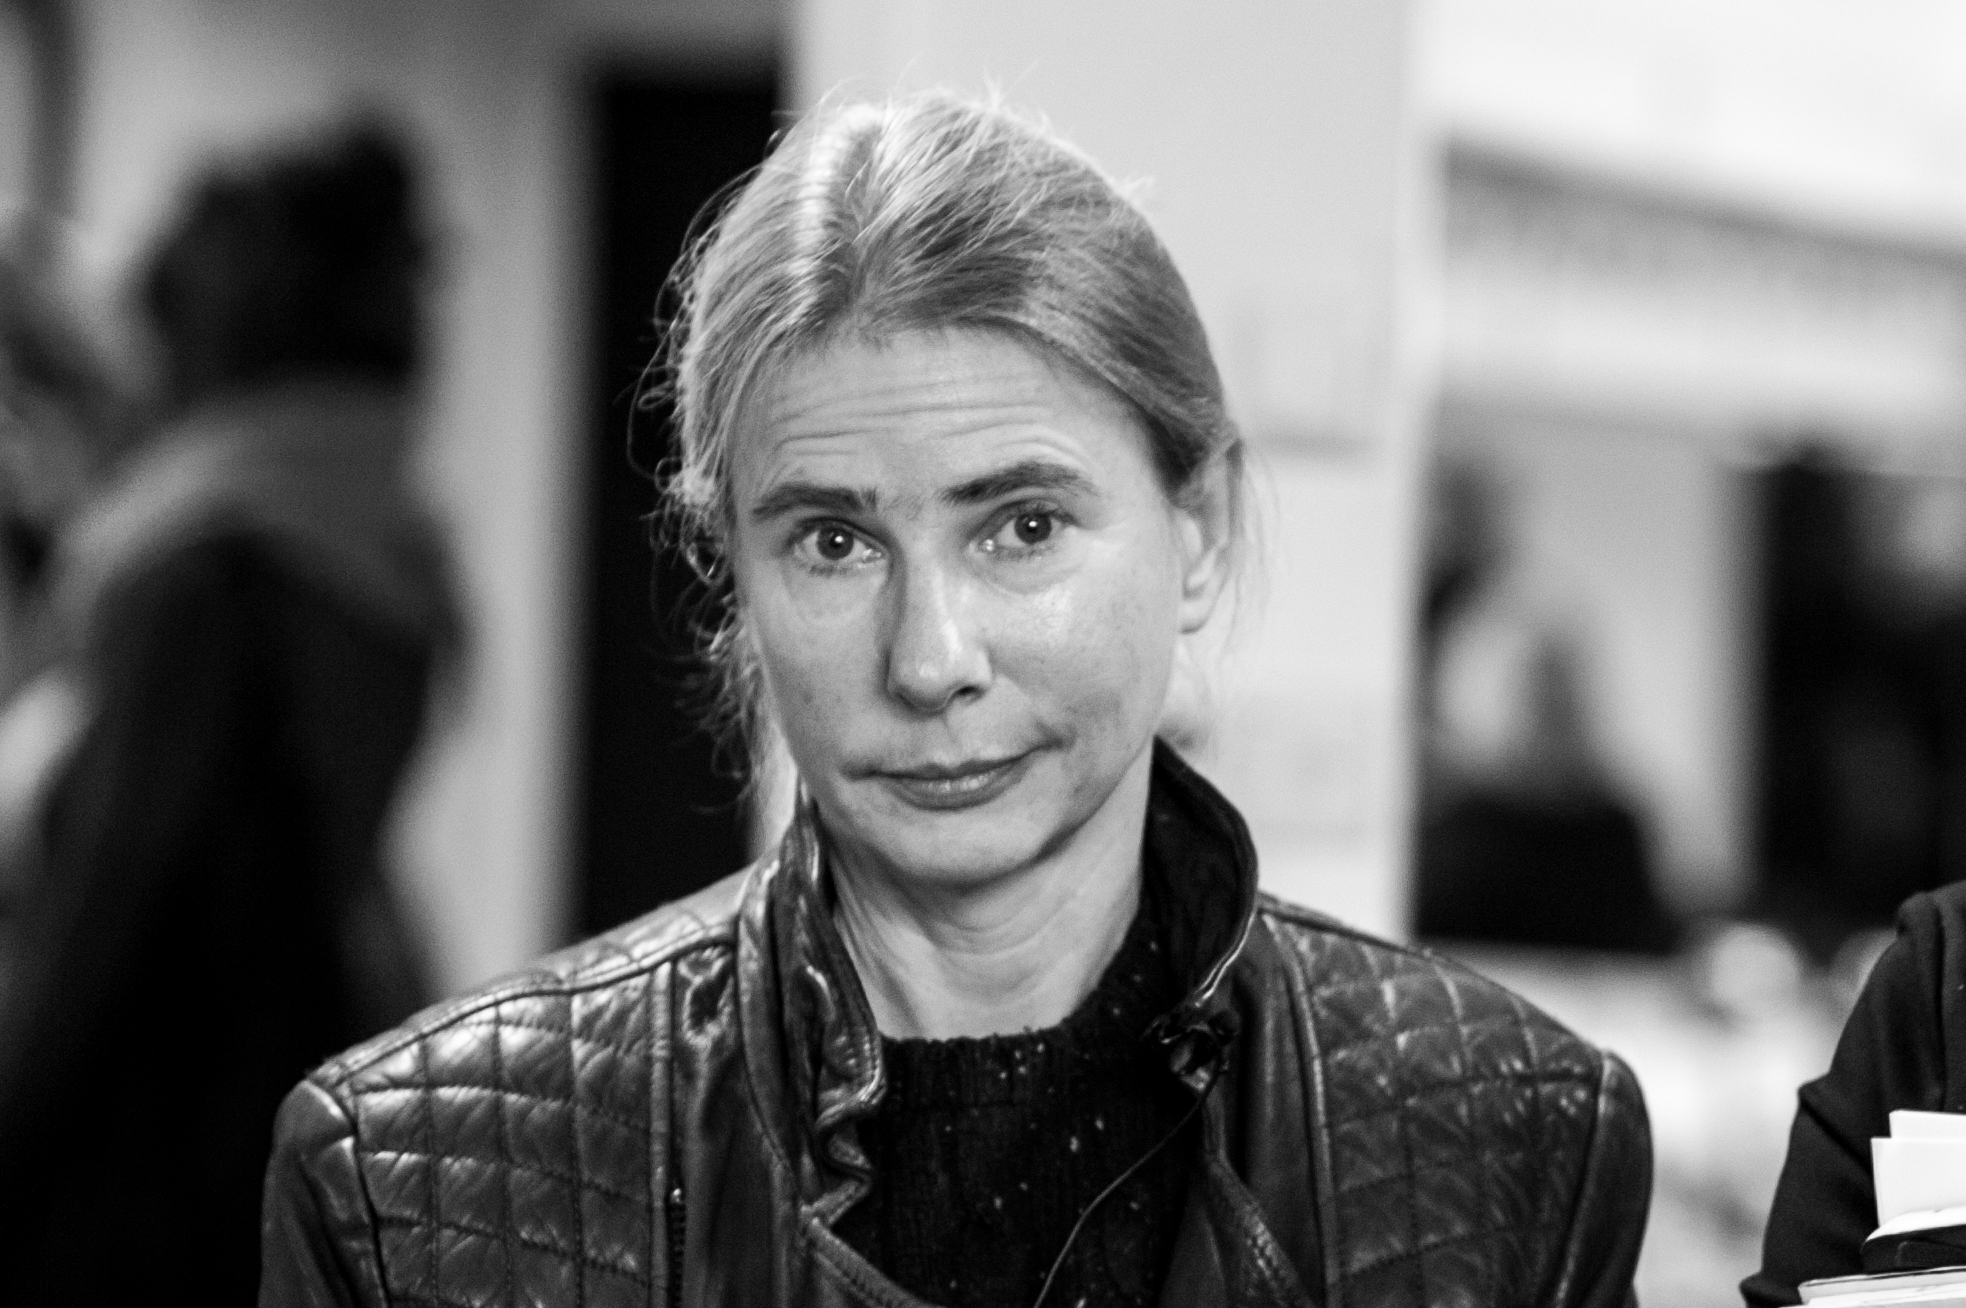 Lionel Shriver’s comments show why Penguin needs to increase representation